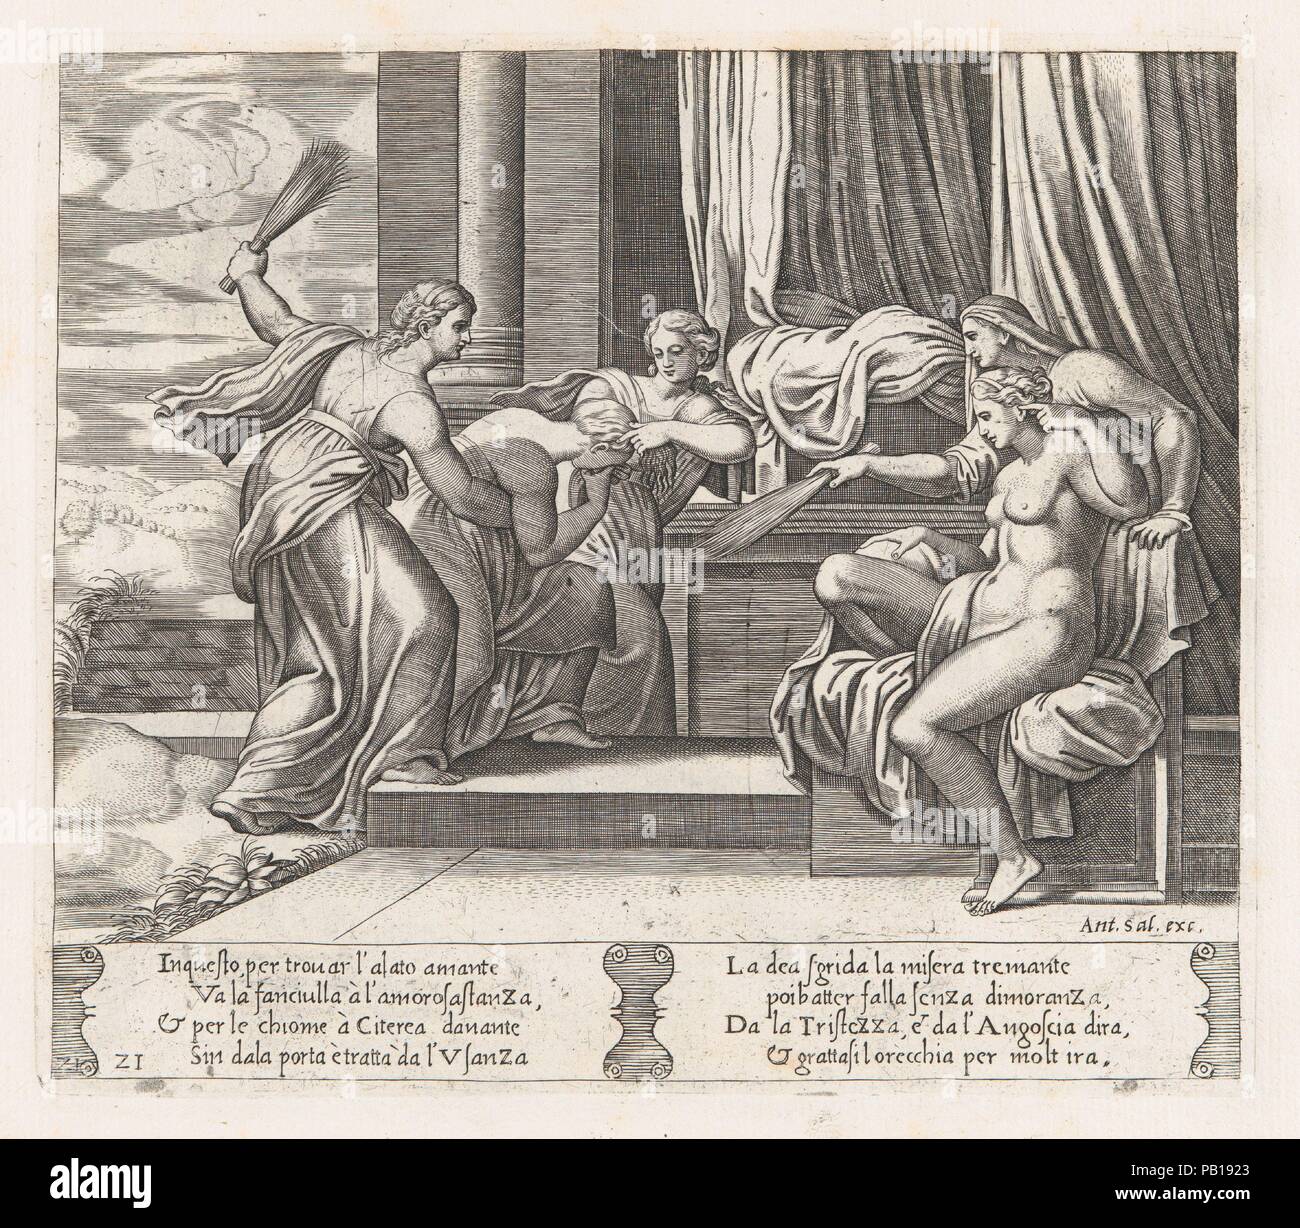 Plate 21: Female personifications of Sorrow and Pain at right punishing Psyche at the behest of Venus, who sits at right, from the Story of Cupid and Psyche as told by Apuleius. Artist: Master of the Die (Italian, active Rome, ca. 1530-60); After Michiel Coxie (I) (Netherlandish, Mechelen ca. 1499-1592 Mechelen). Dimensions: Sheet: 10 1/4 × 15 13/16 in. (26 × 40.2 cm)  Plate: 8 1/16 × 9 3/8 in. (20.5 × 23.8 cm). Publisher: Antonio Salamanca (Salamanca 1478-1562 Rome). Series/Portfolio: The Story of Cupid and Psyche as told by Apuleius. Date: 1530-60.  This book contains 32 plates bound togethe Stock Photo